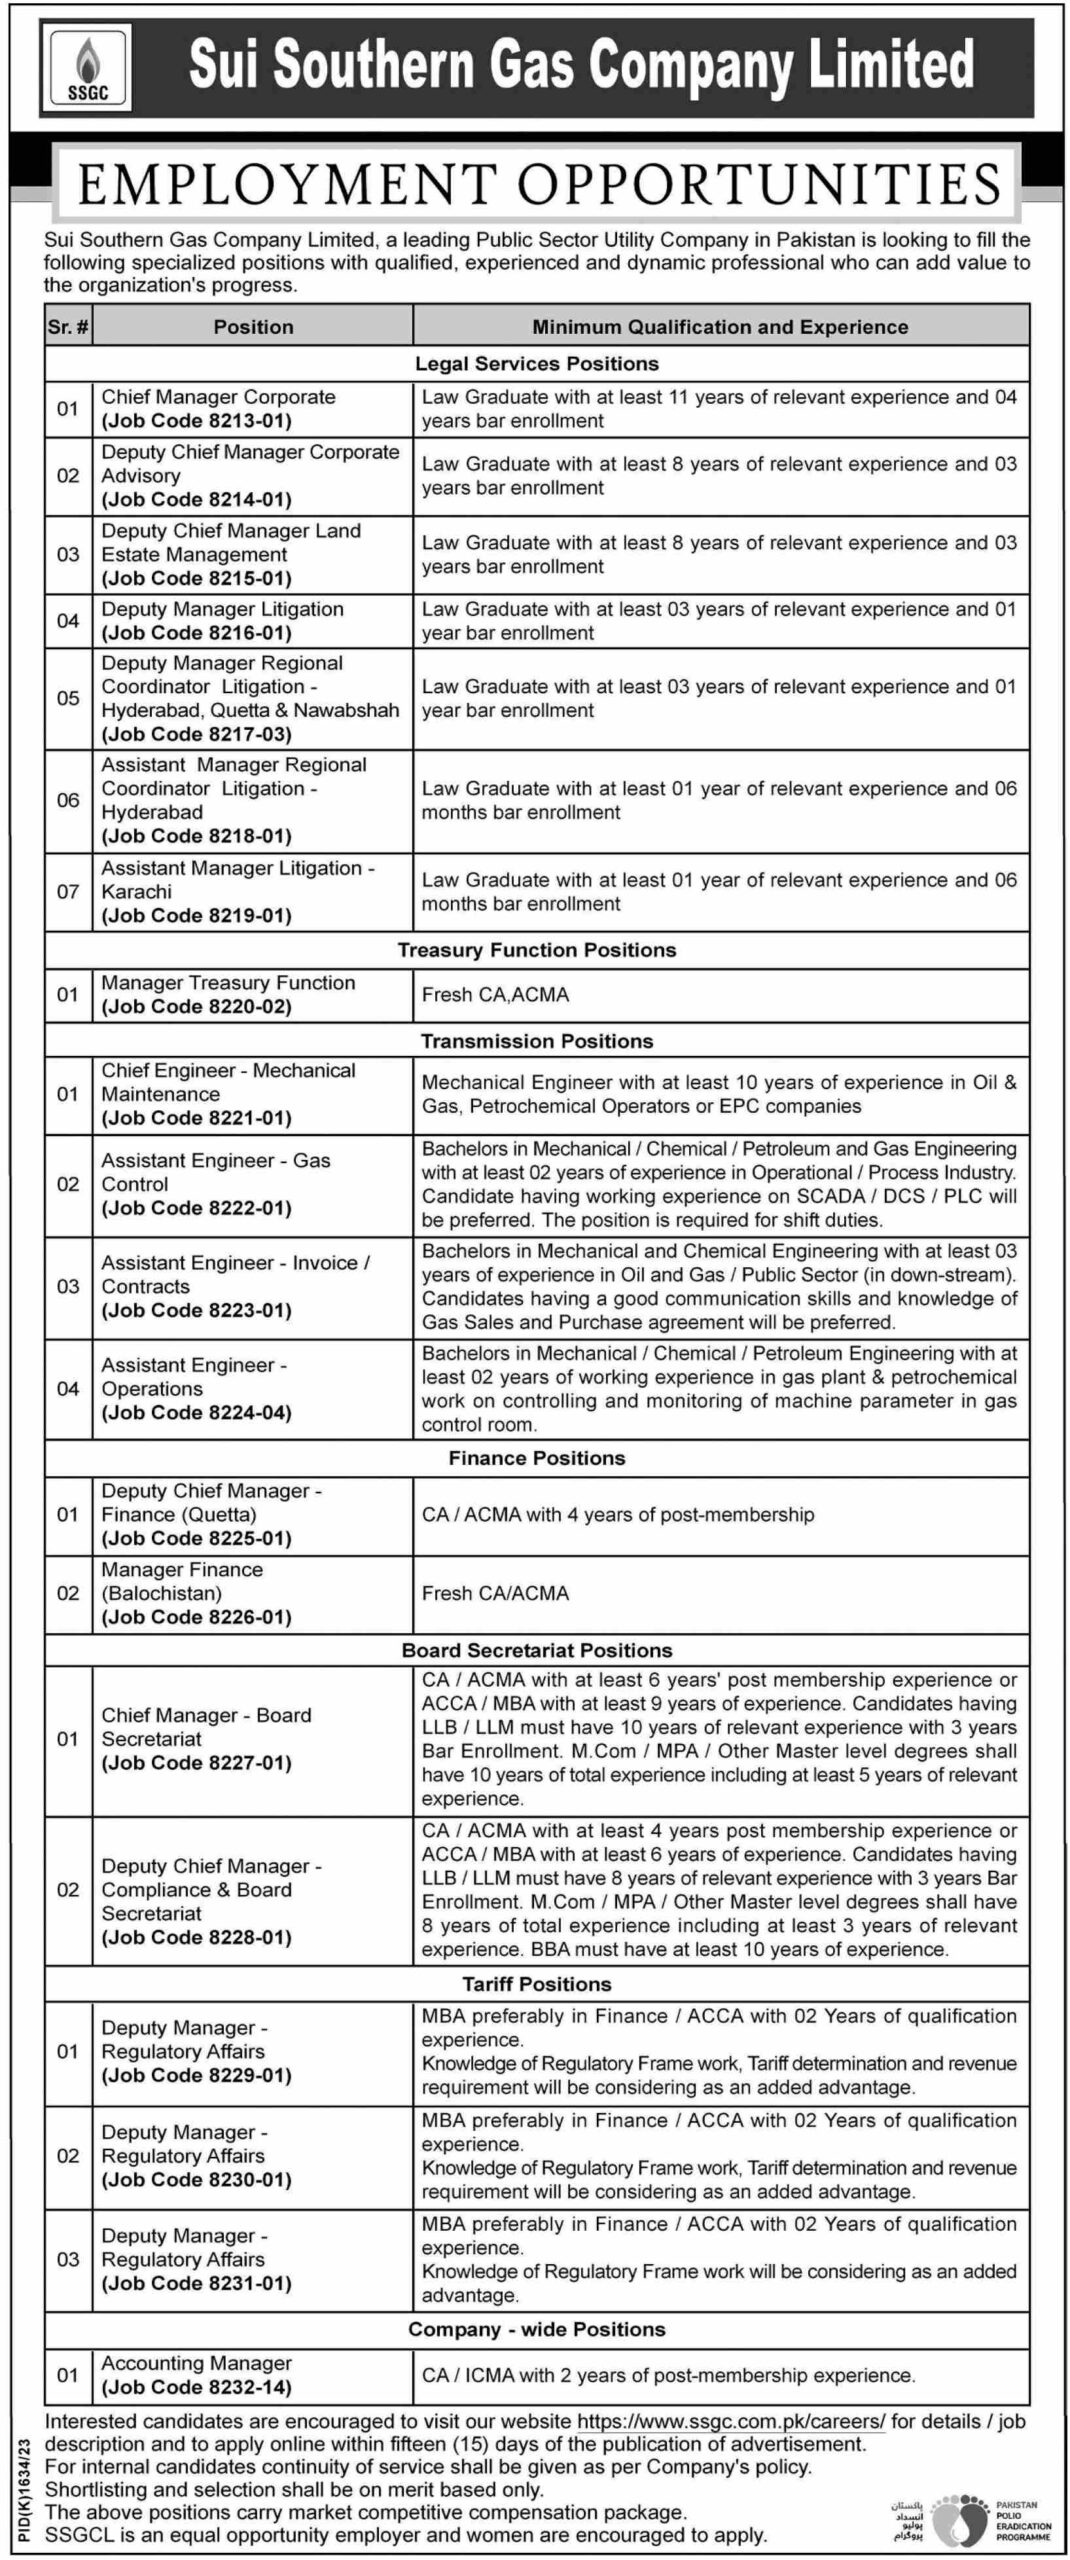 SSGC Sui Southern Gas Company Limited Jobs For Law Graduate